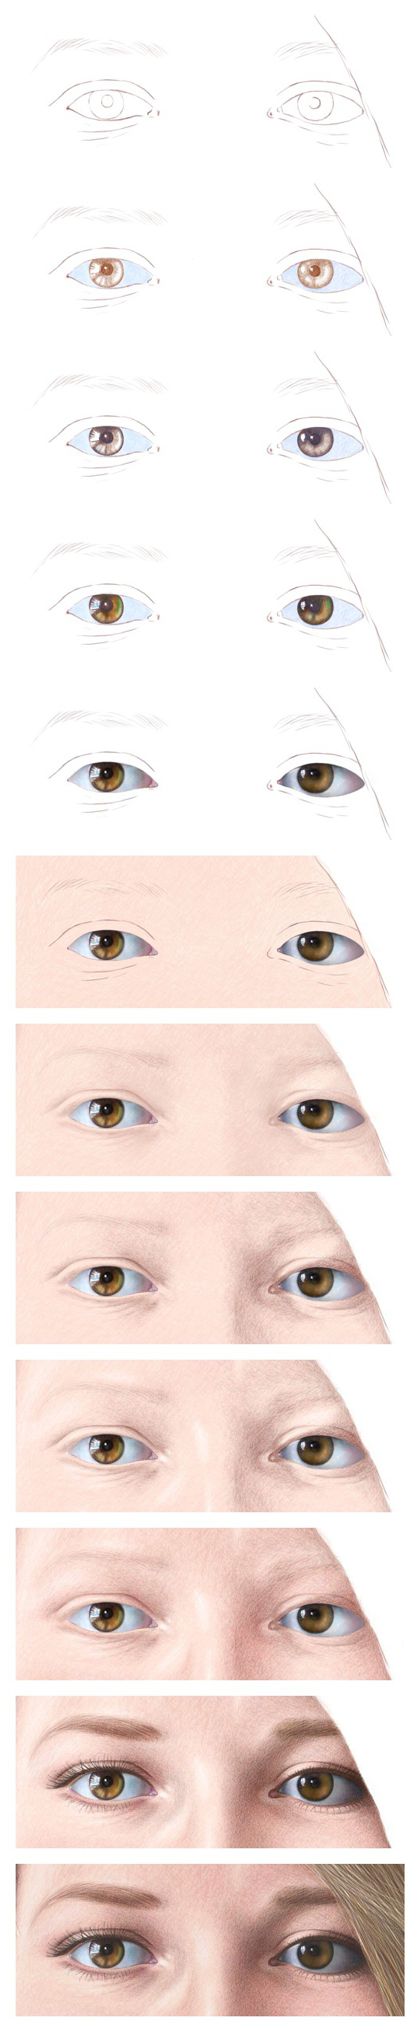 Color Pencil Portraits - How to Draw the Eyes: Steps 1-12